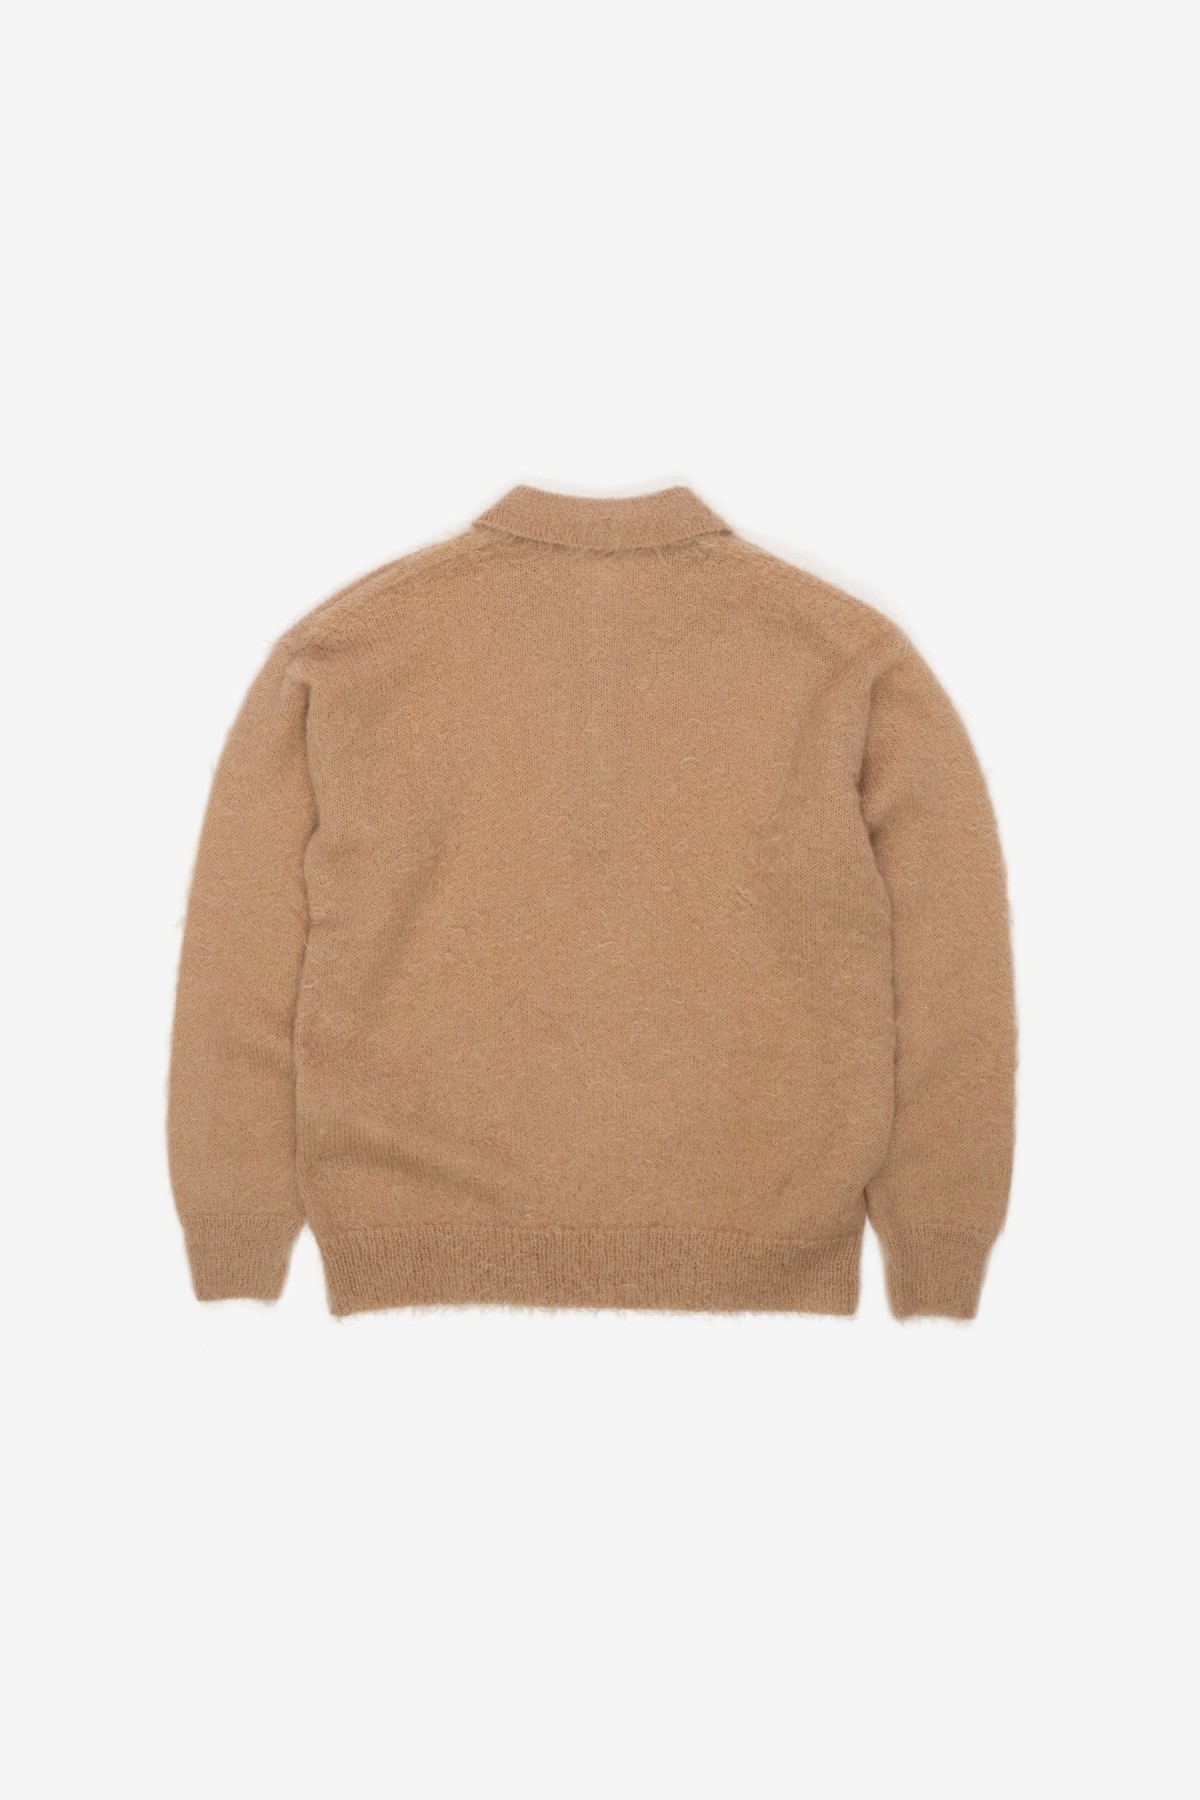 Auralee Brushed Super Kid Mohair Knit Polo in Beige